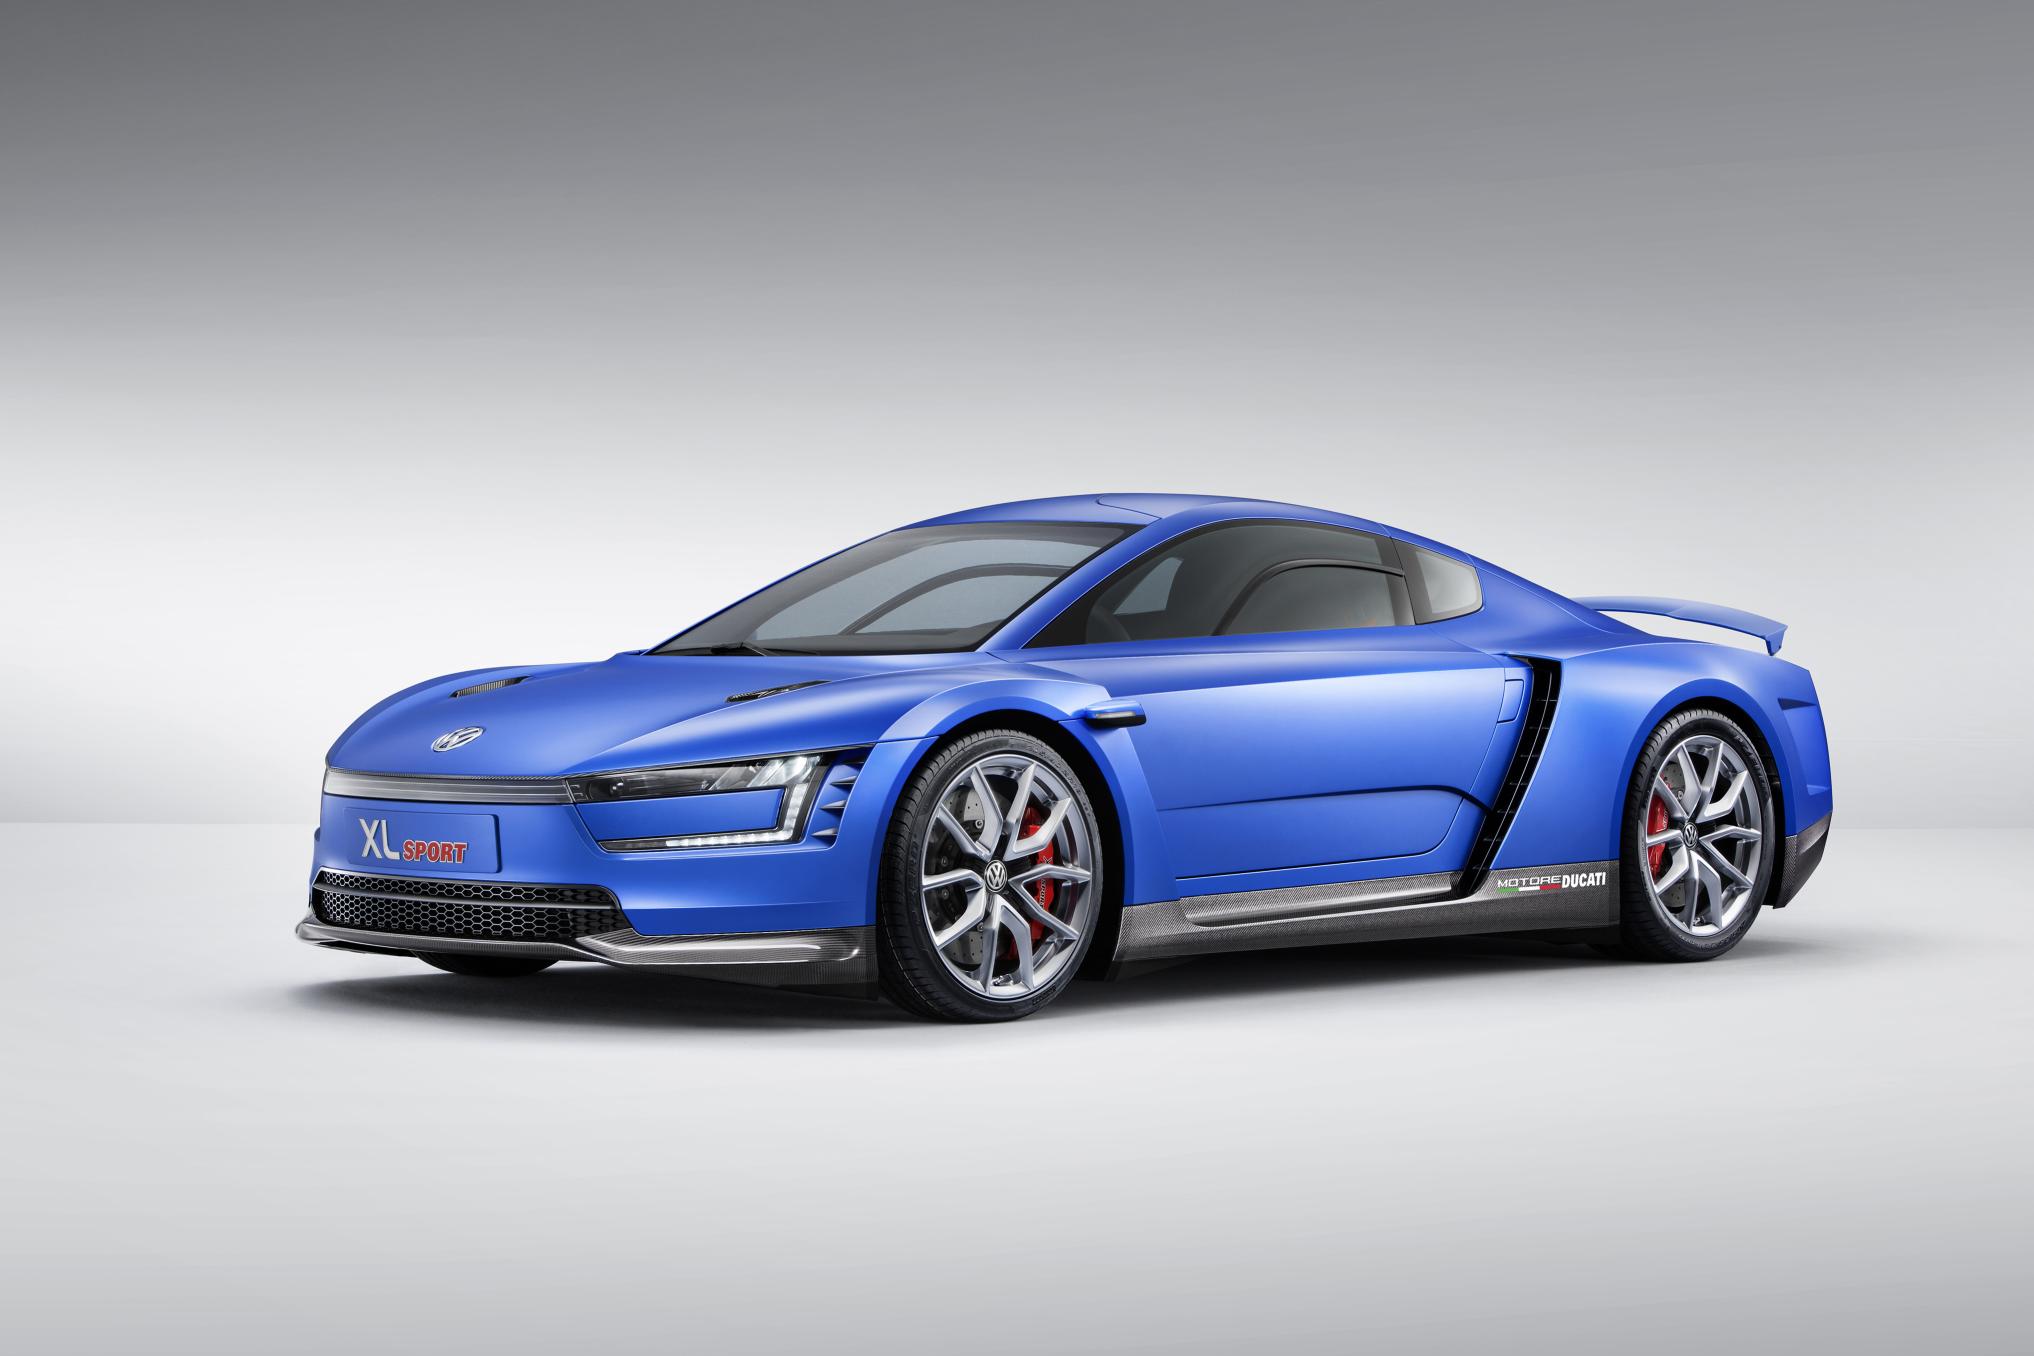 Goodwood FoS is to Witness The Launch of VW XL Sport And GOLF R400